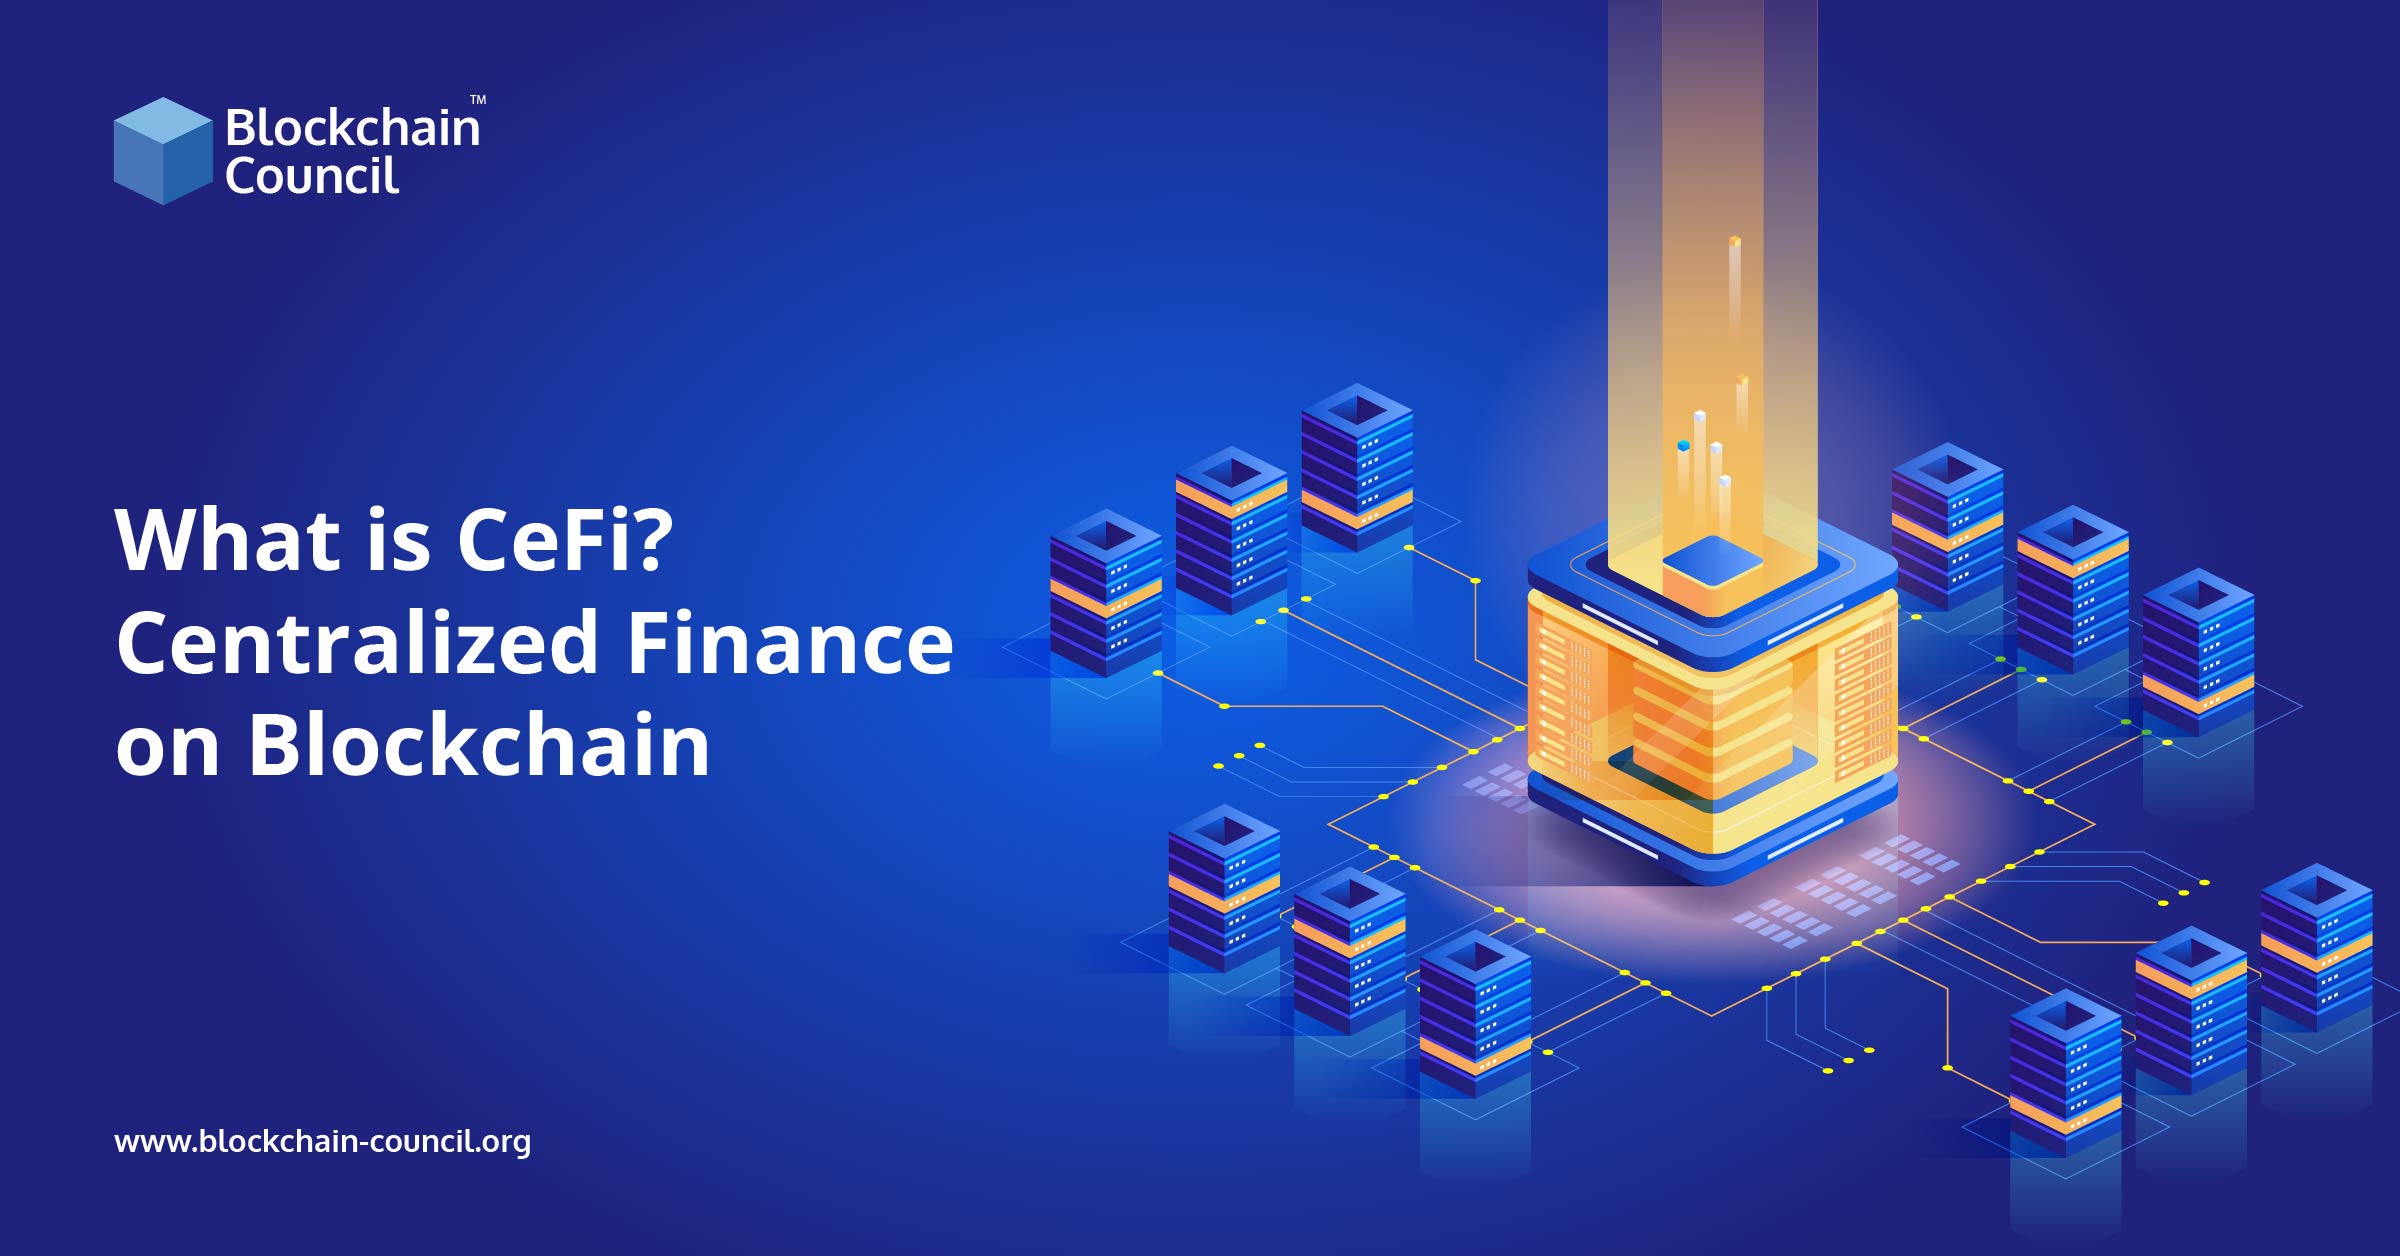 What is CeFi Centralized Finance on Blockchain